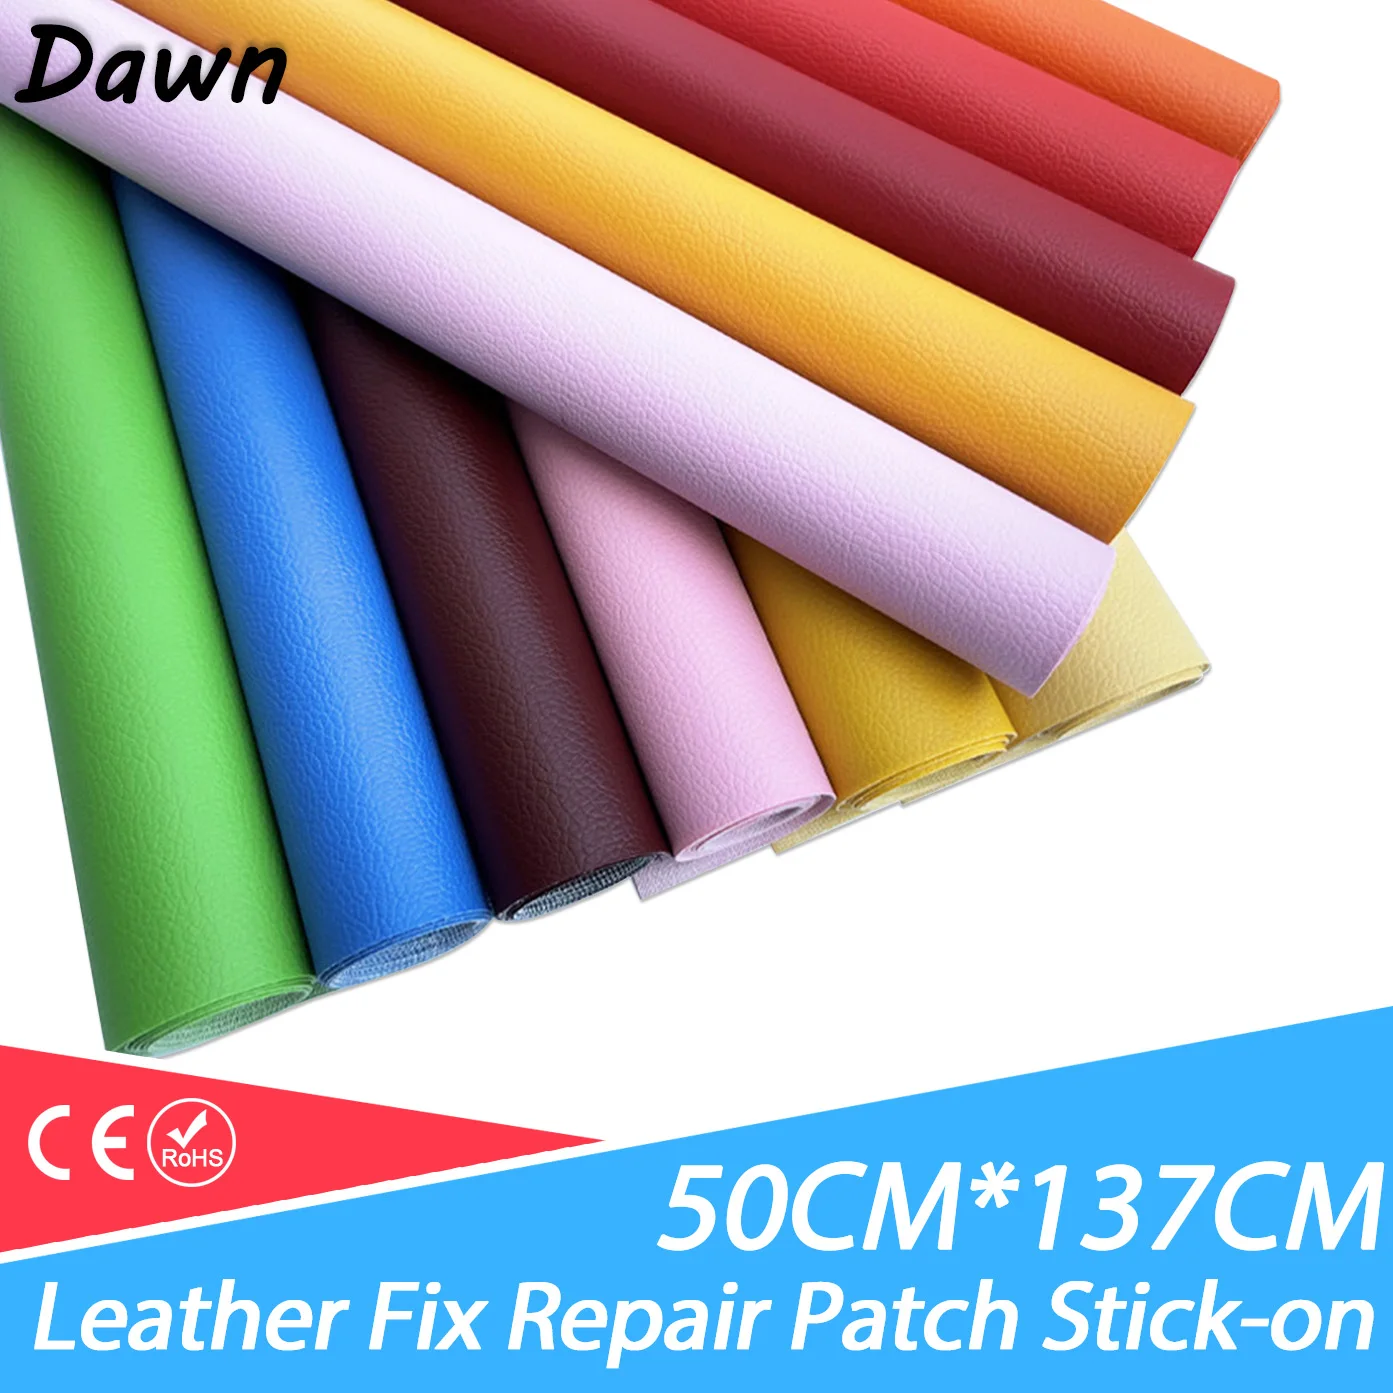 Self Adhesive Leather Fix Repair Patch Stick-on Sofa Car seat Repairing Subsidies Leather PU Fabric Stickers Patches Waterproof preview-7